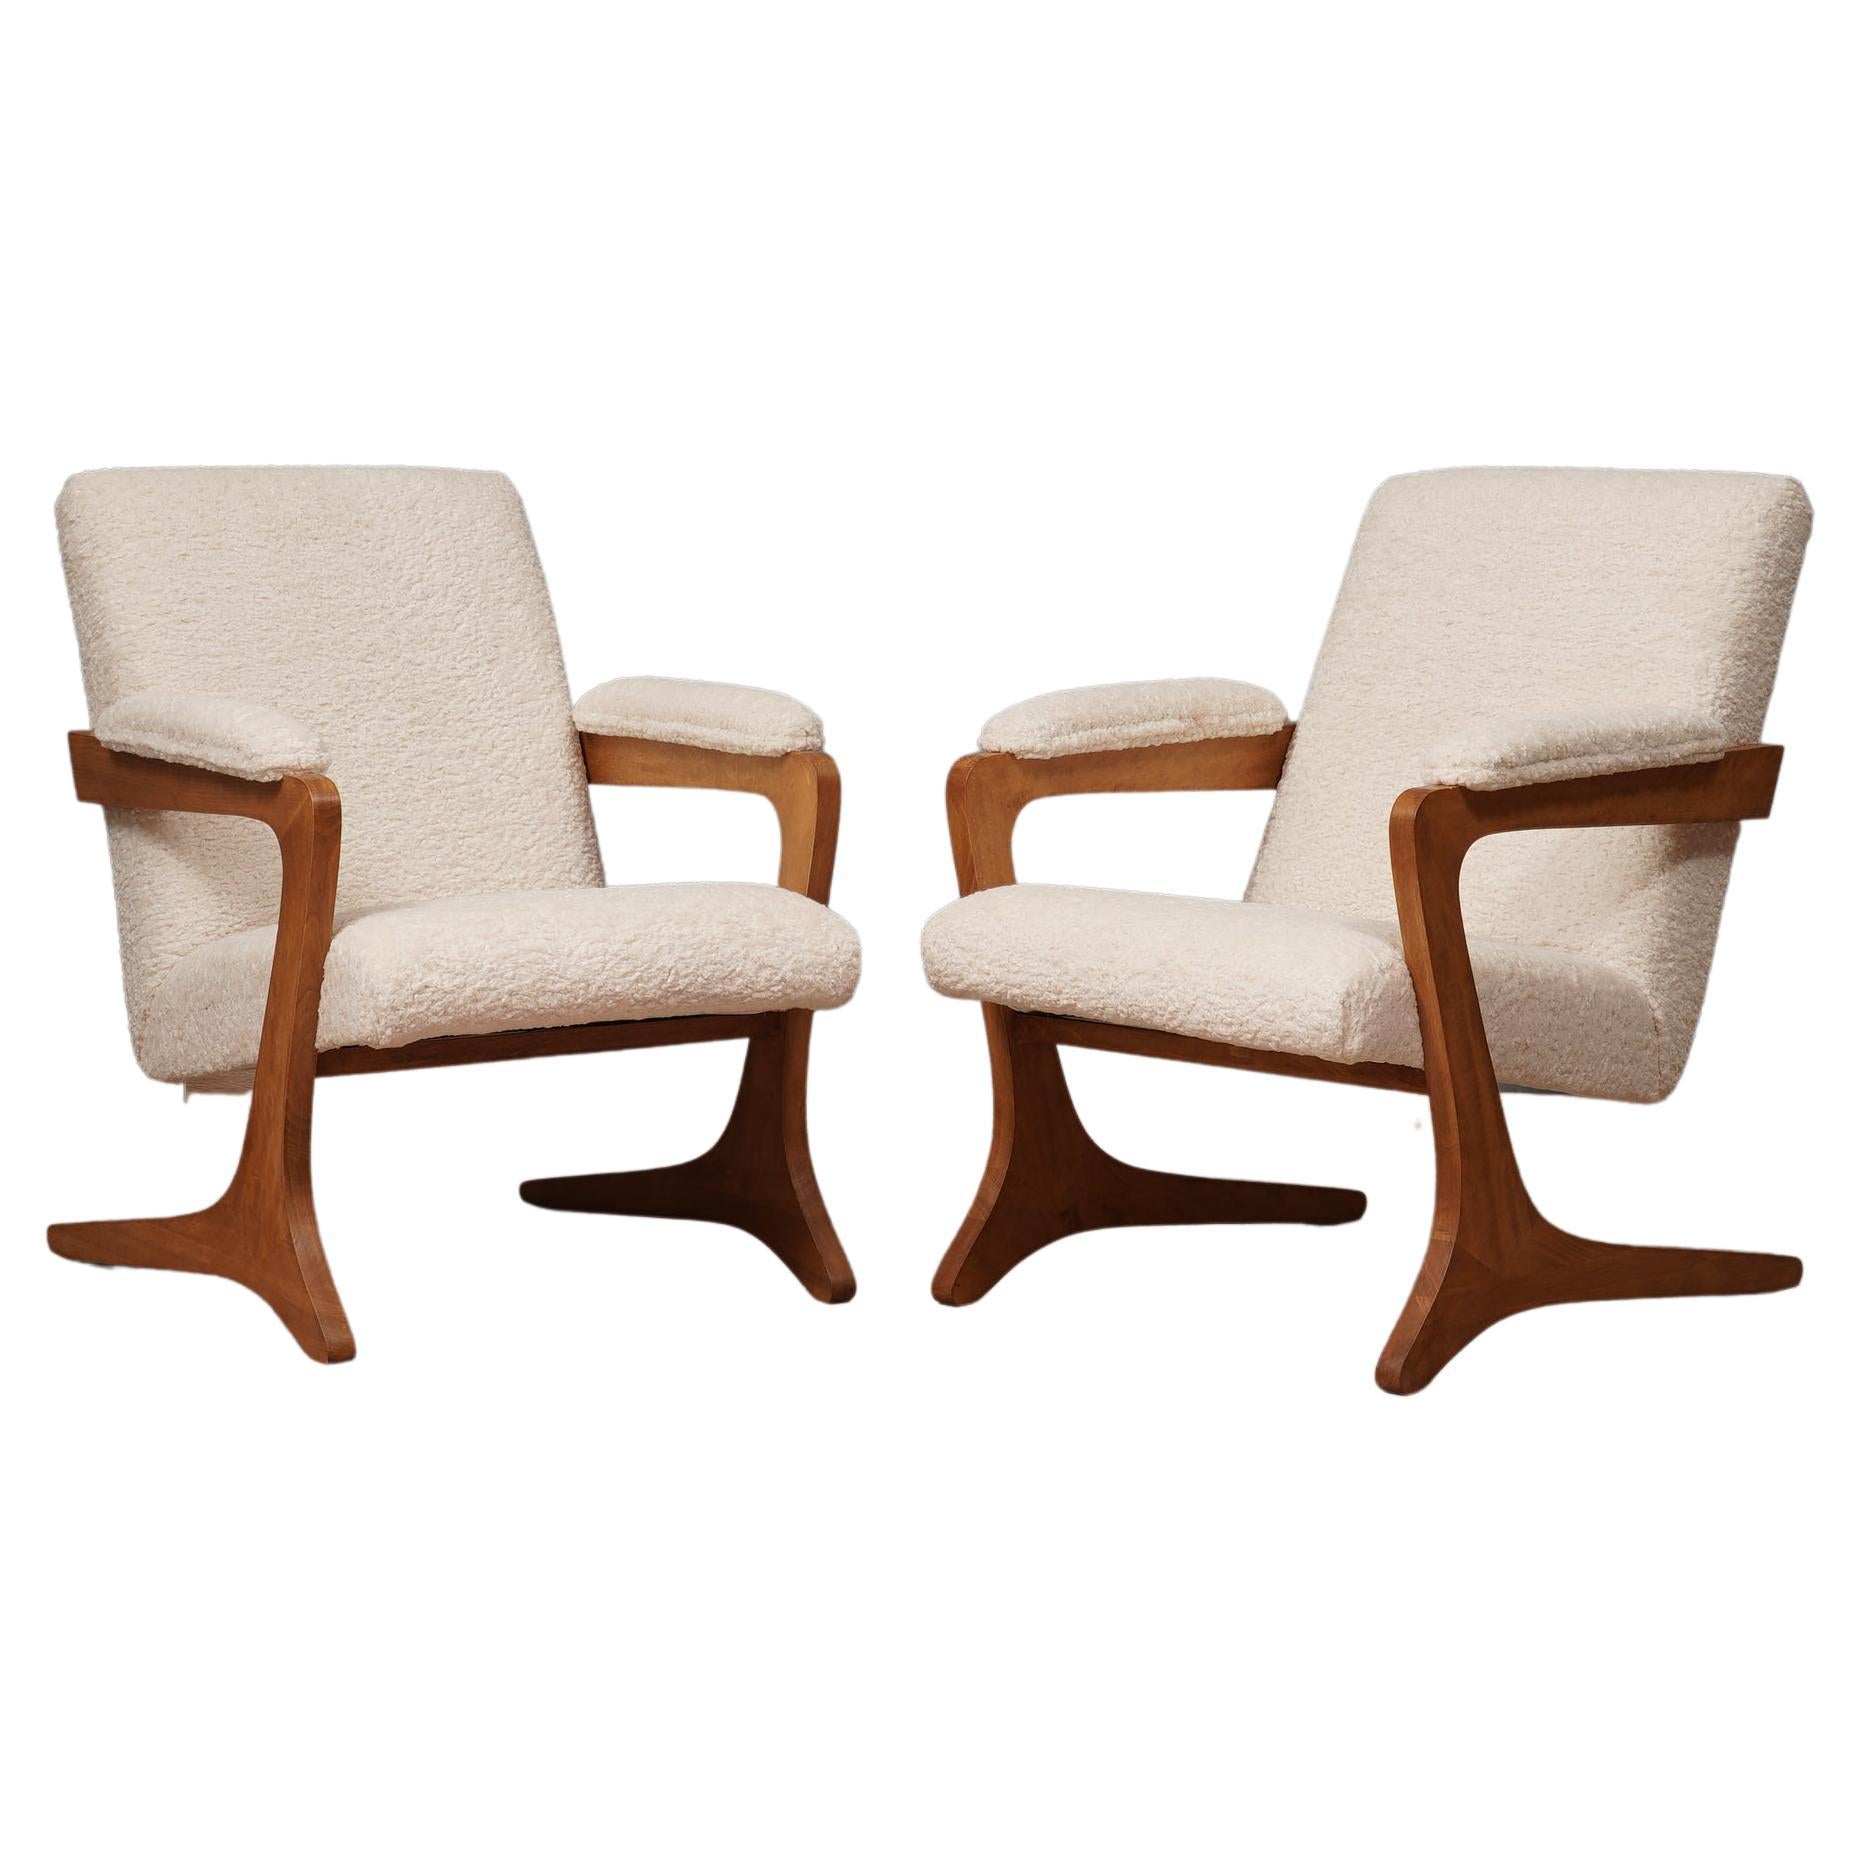 MidCentury Beech Wood and White Fabric ArmChairs, 1970